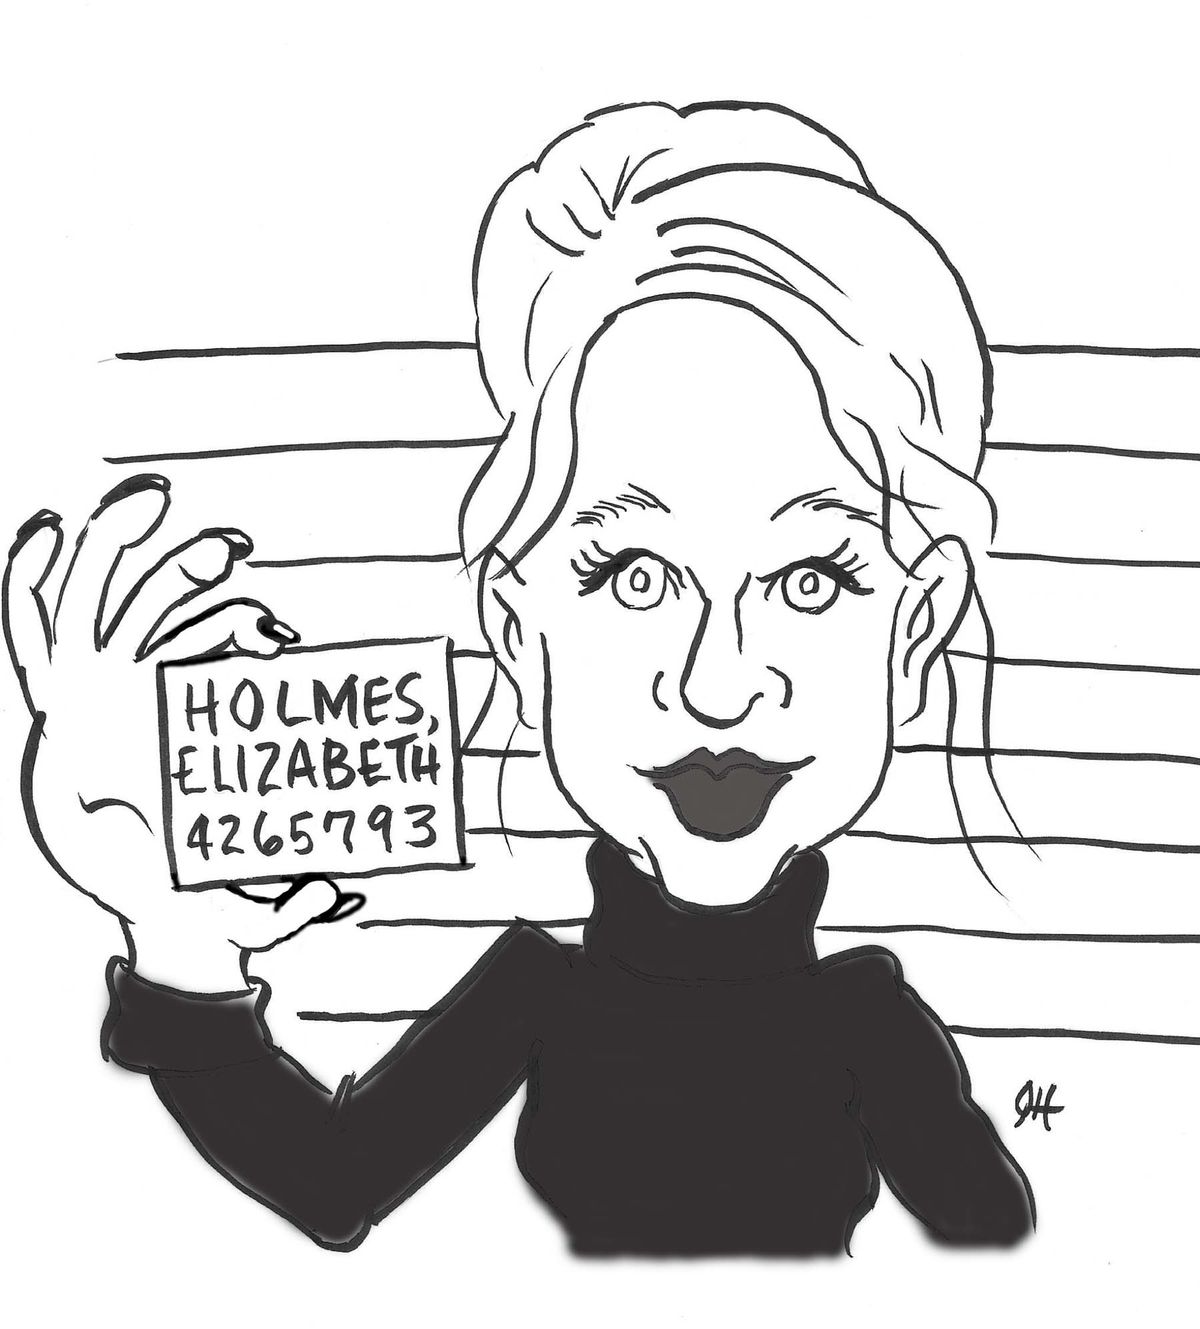 Illustration of a mugshot of Elizabeth Holmes holding a place card with her booking ID 